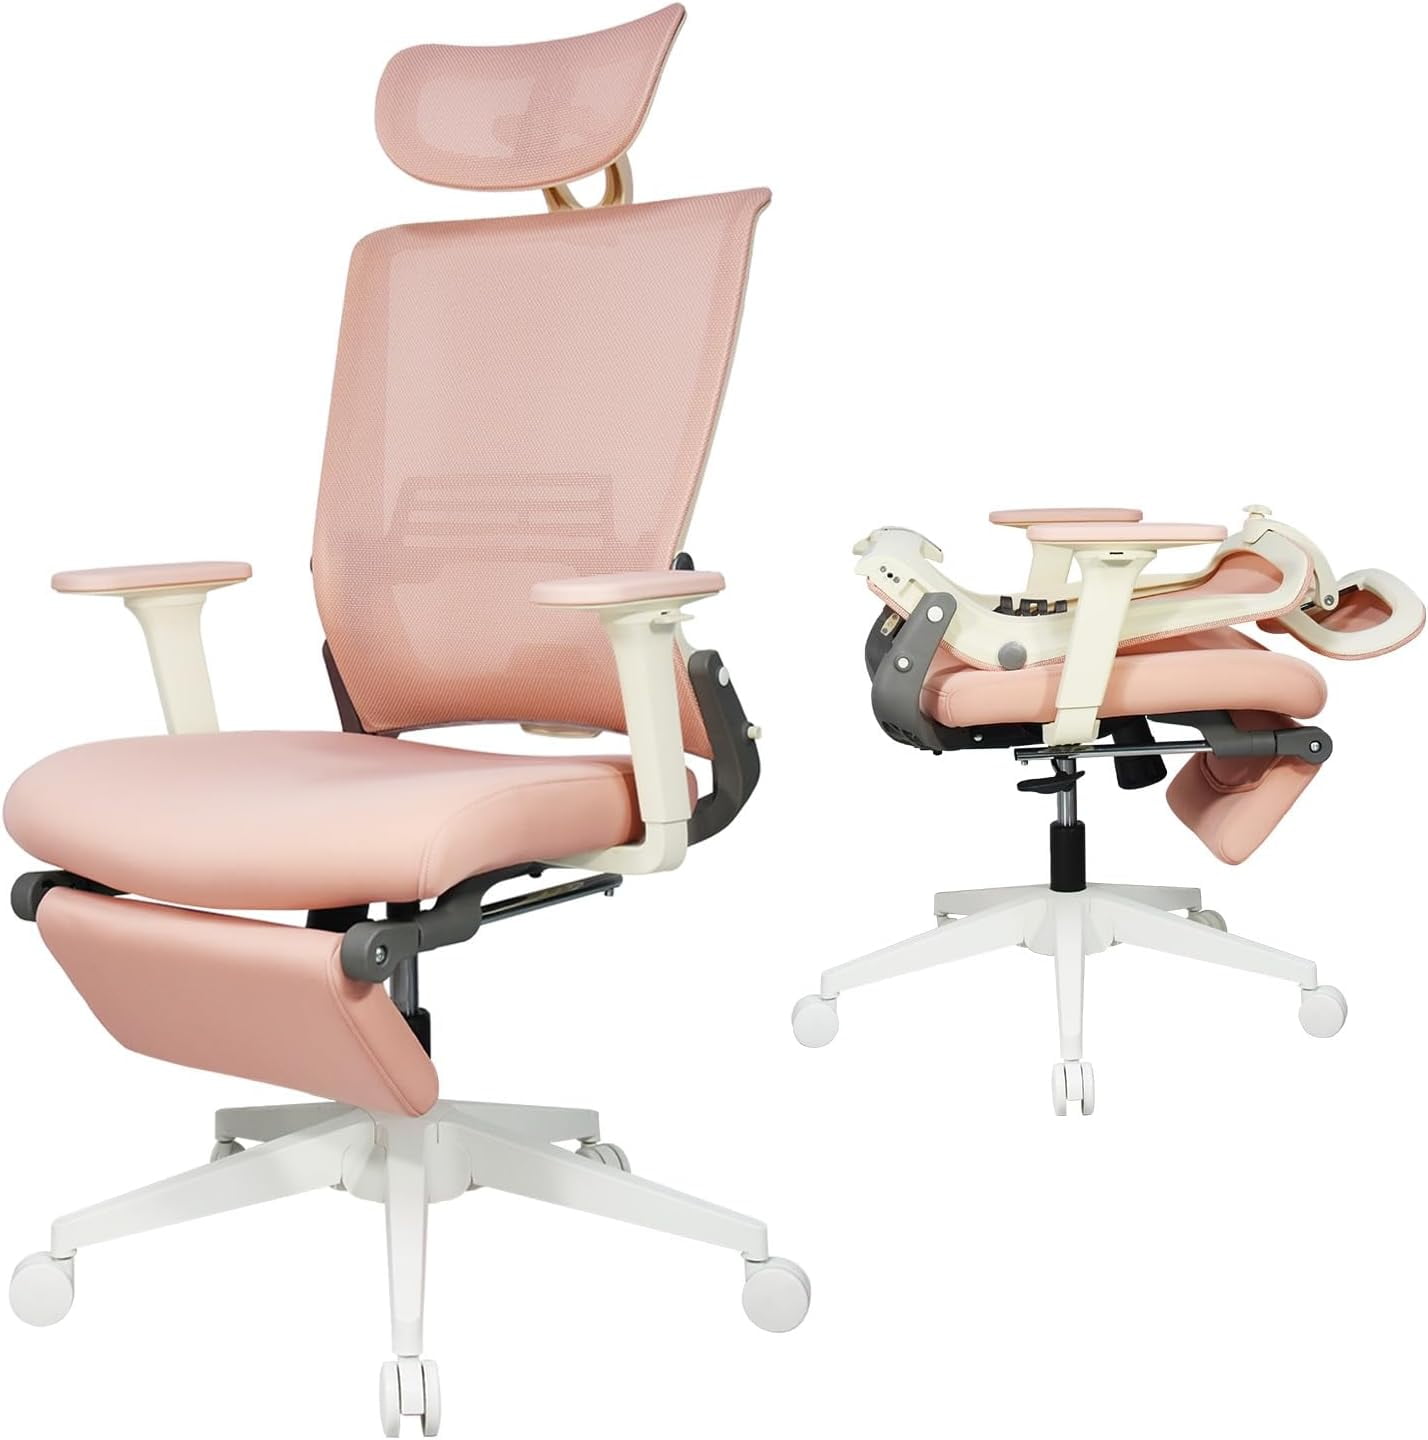 Pinksvdas Office Chair with Vibrating, Adjustable Ergonomic Reclining Chair  with Lumbar Support H5080BR - The Home Depot